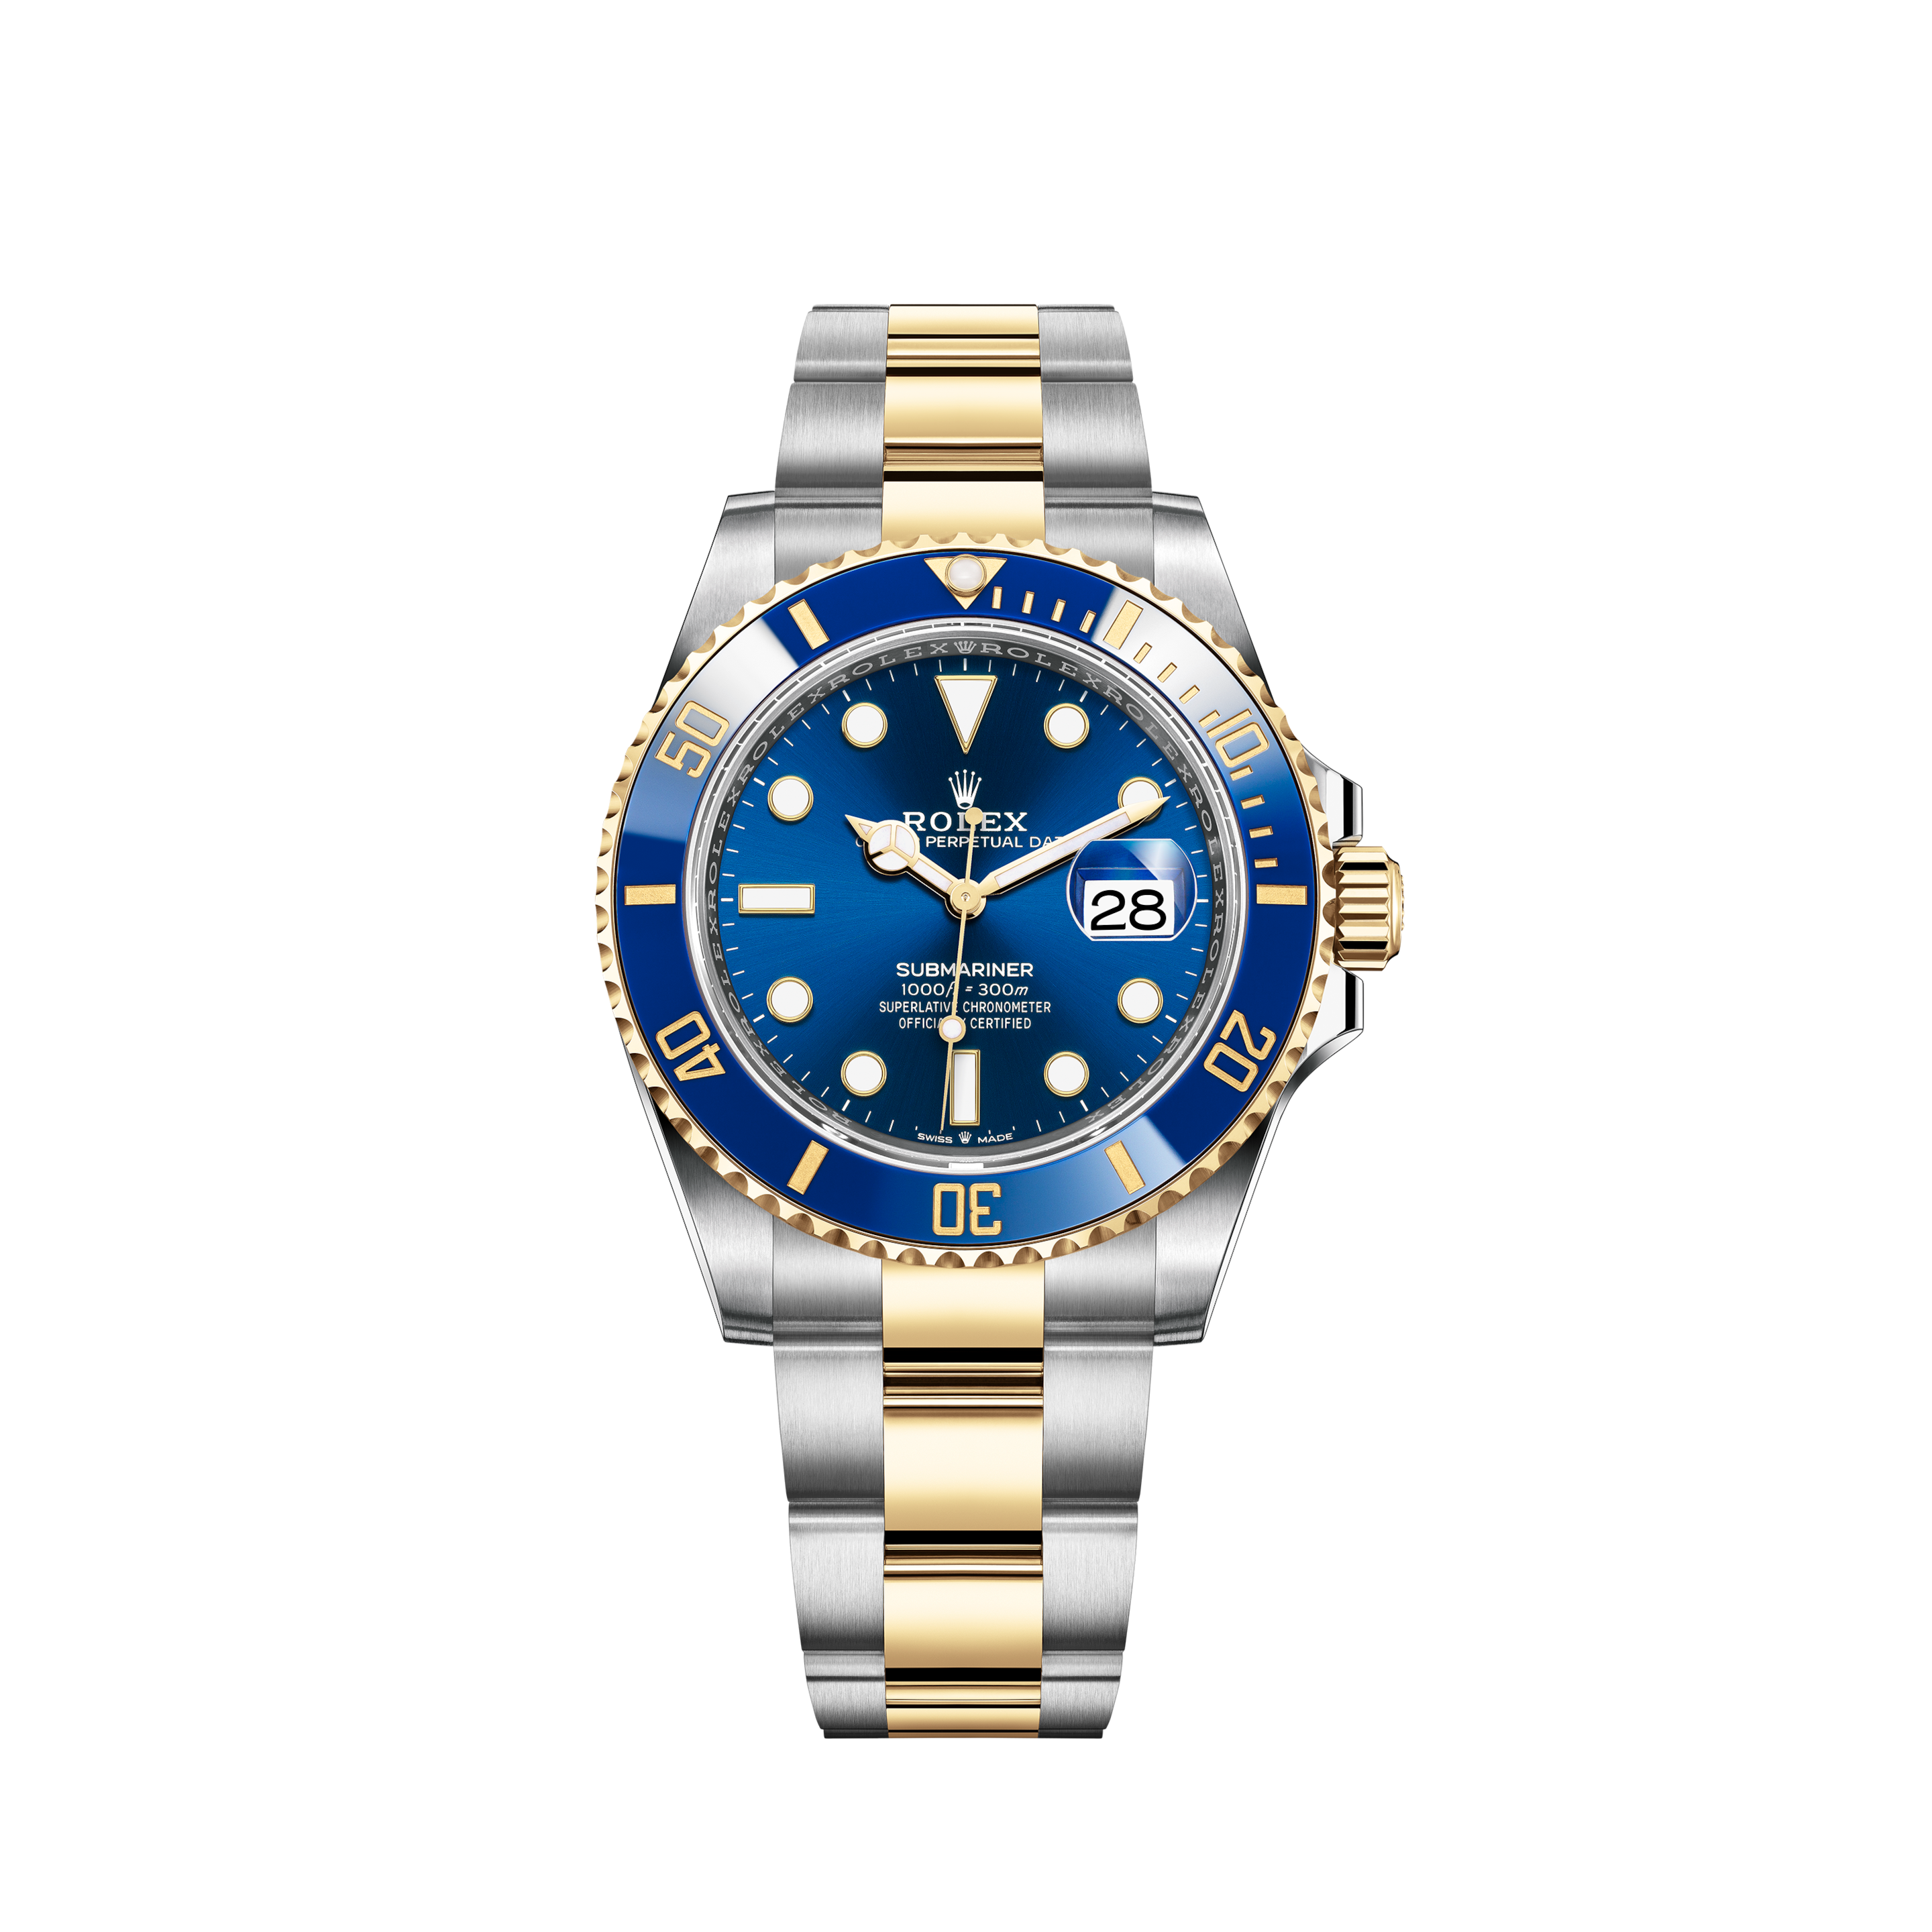 Rolex | Submariner Date Triple “0” or Extra zero, Ref. 168000, from 1985